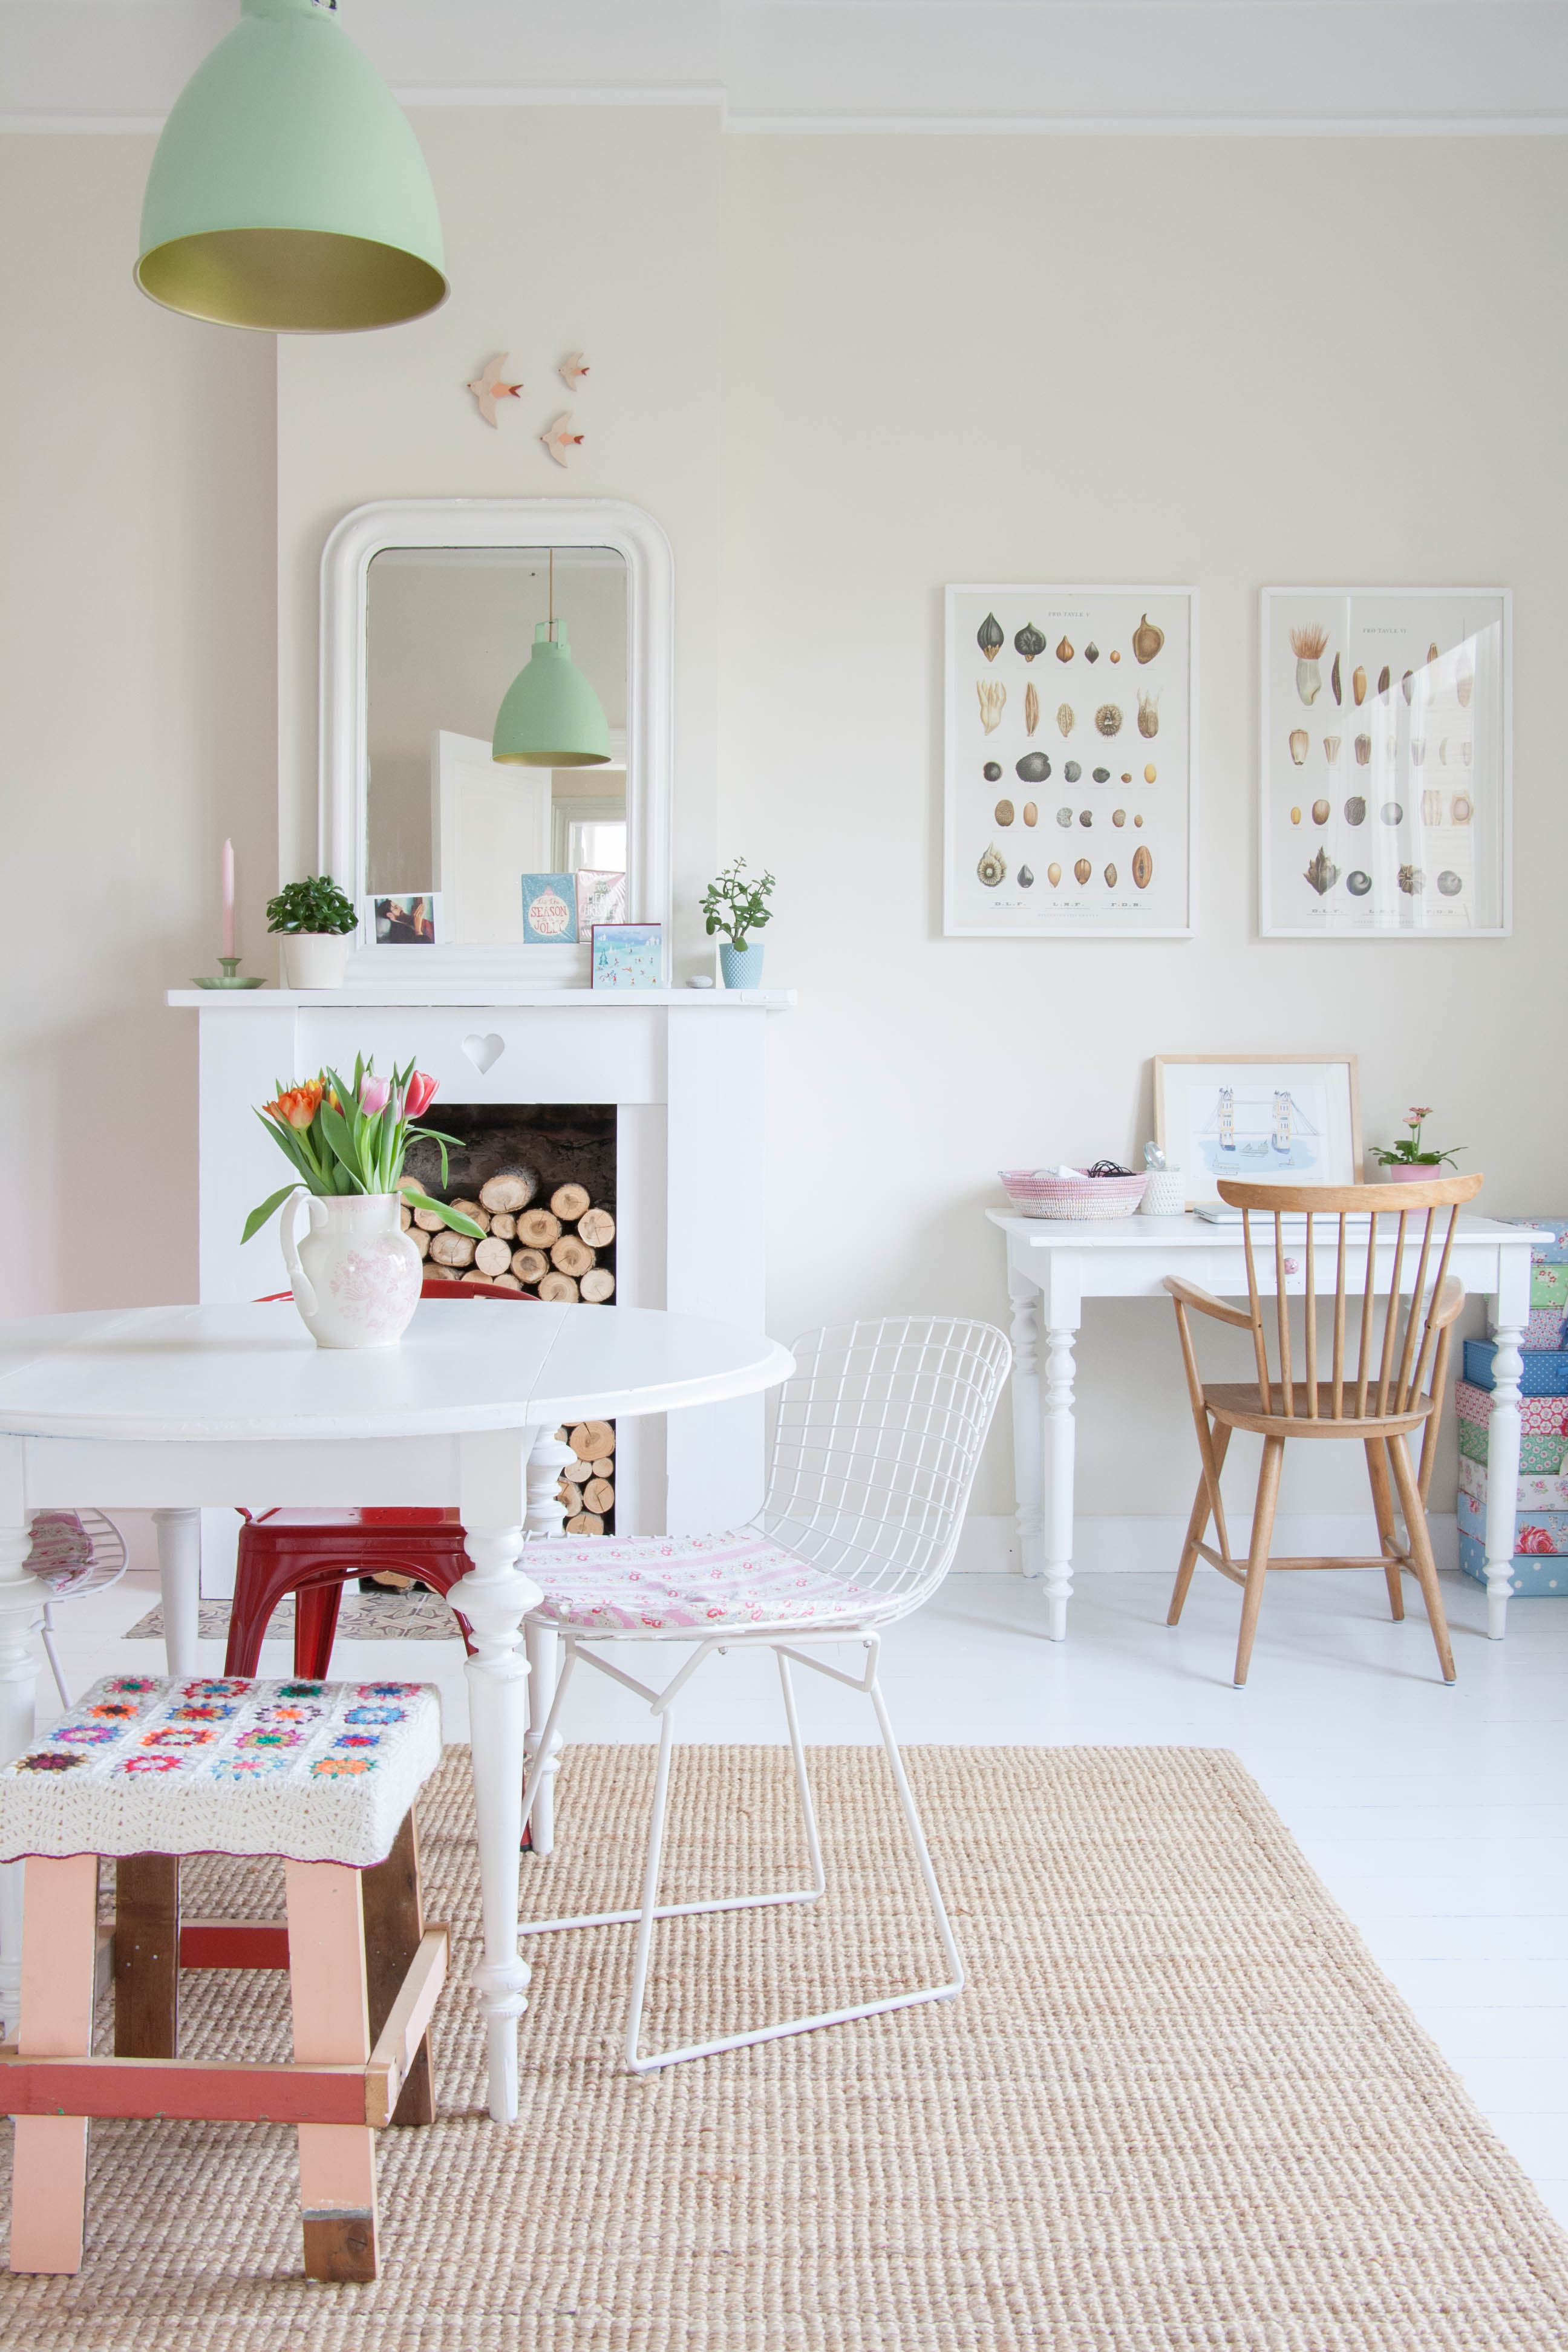 What's Hot on Pinterest- Lighting and Scandinavian Style Ideas